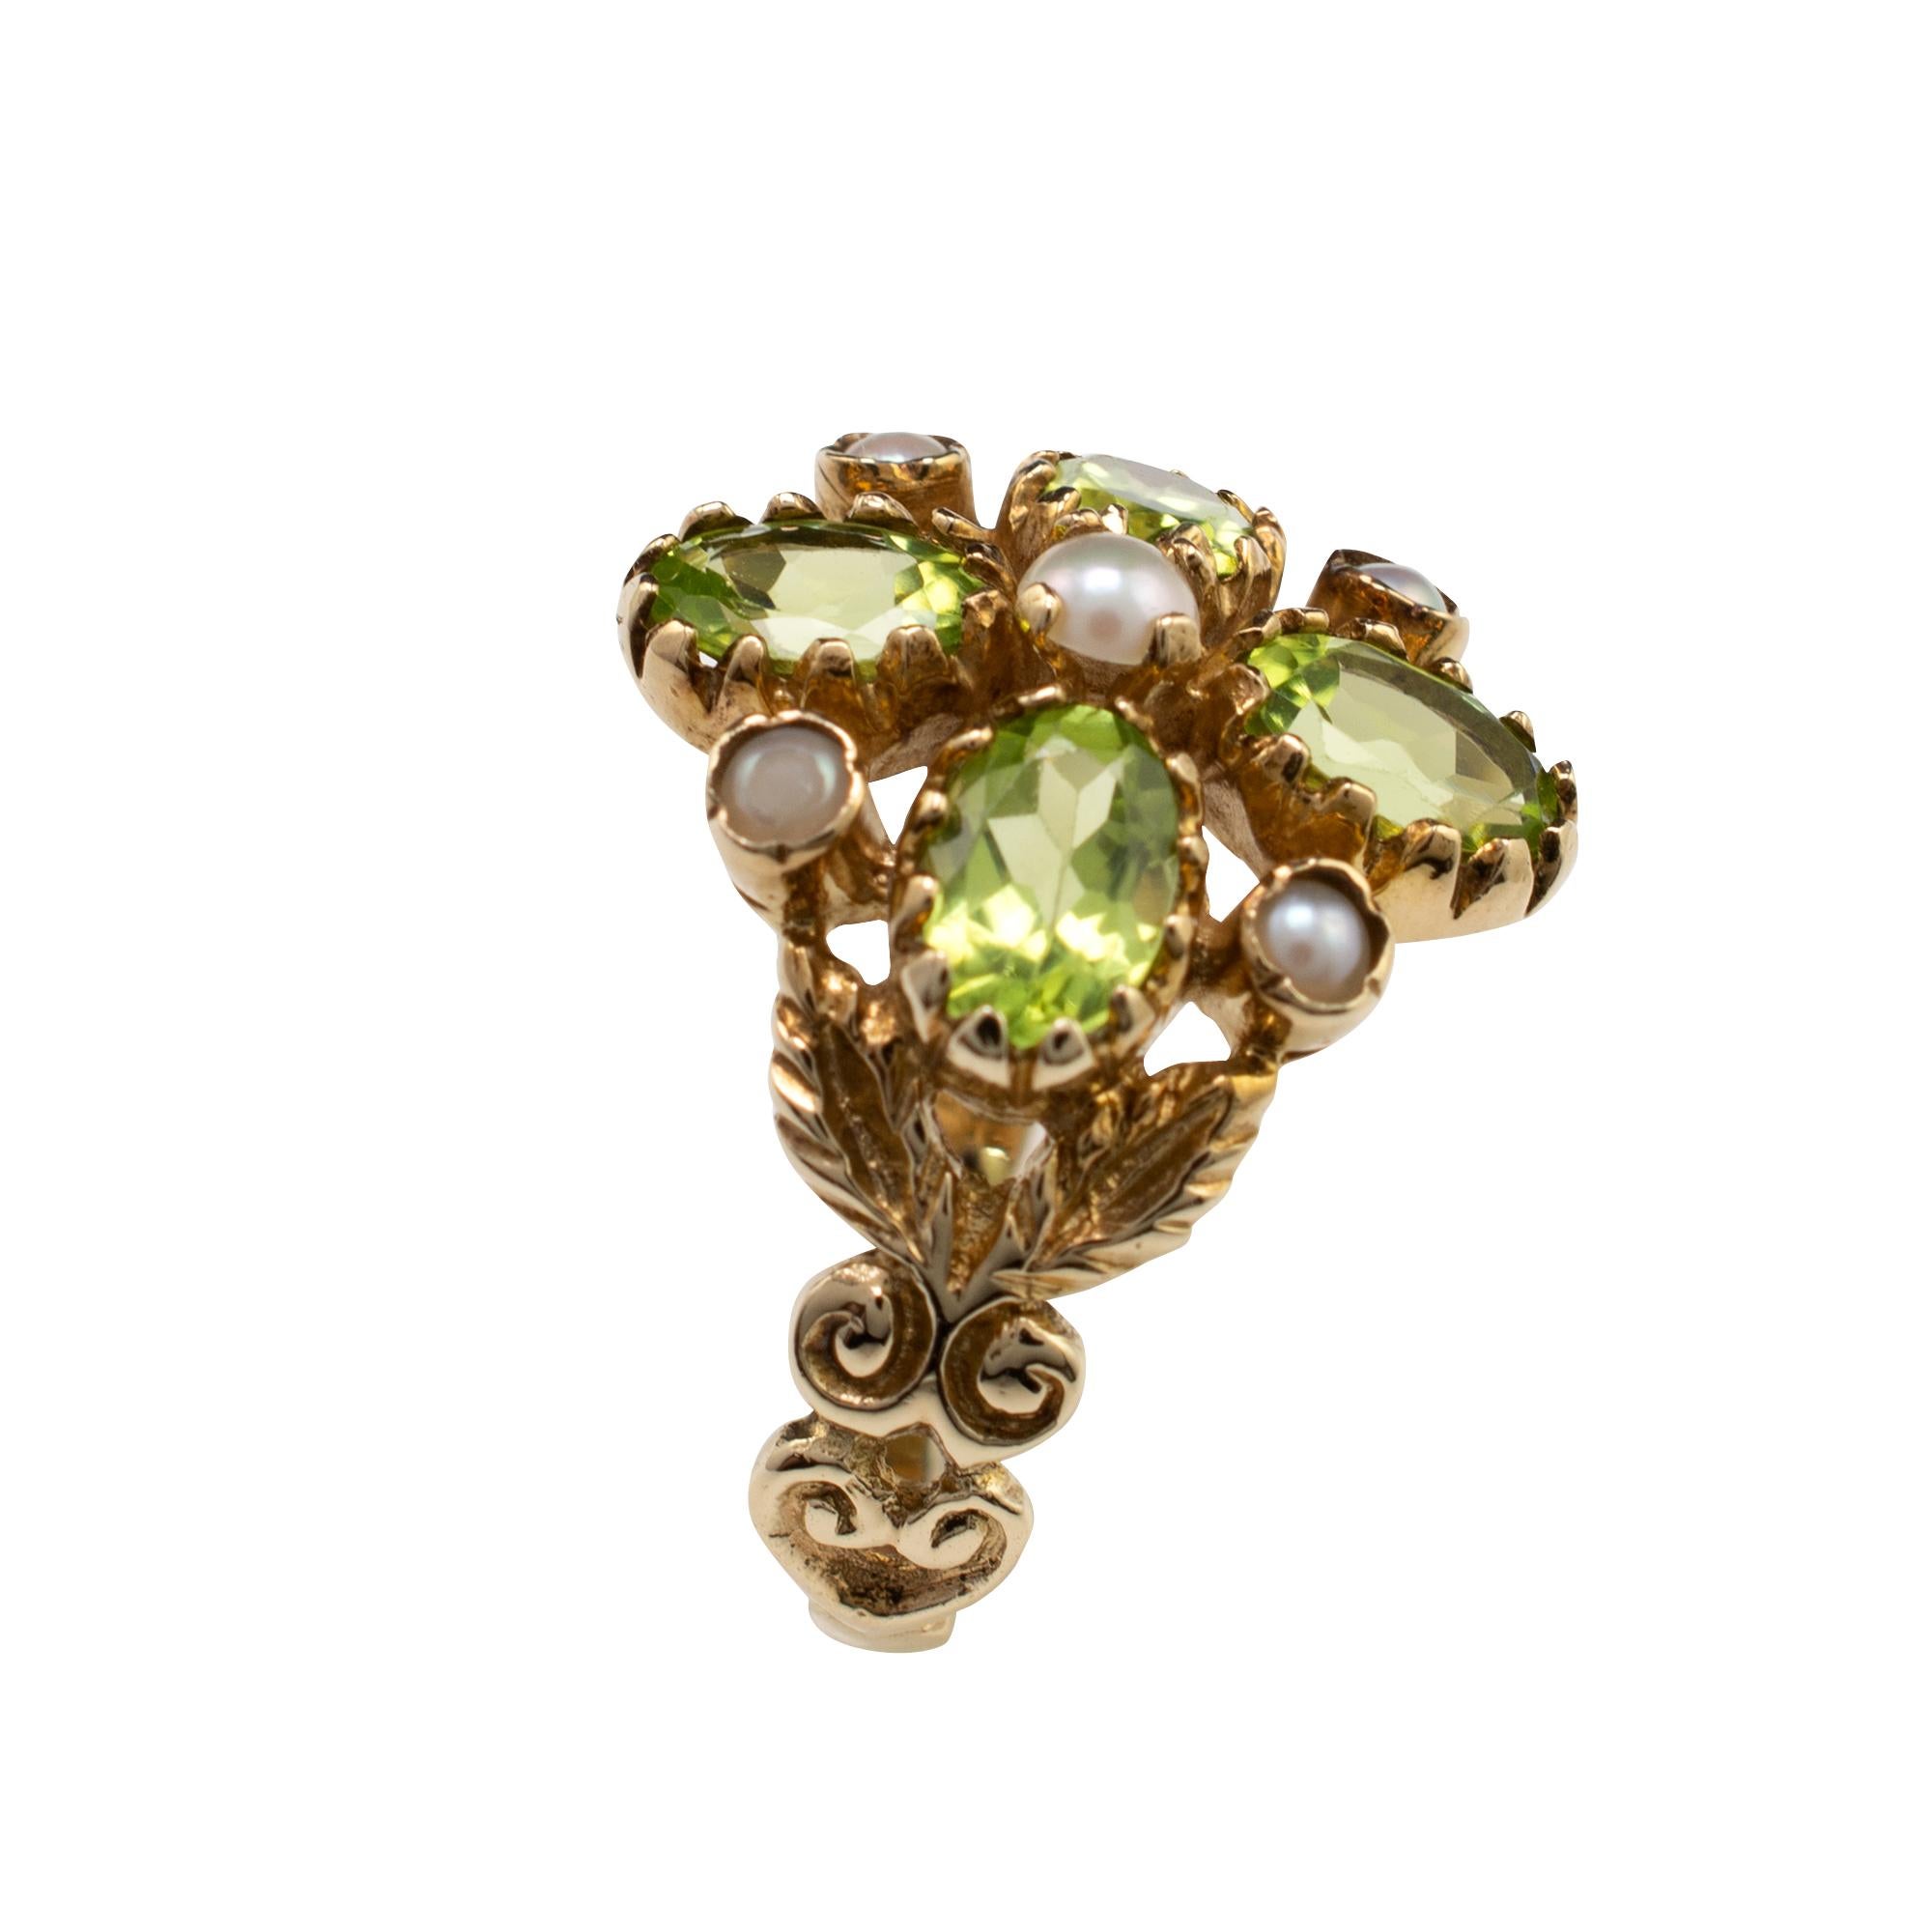 This striking peridot and pearl flower cocktail ring is crafted in 9 karat gold.

The split shoulders are nicely crafted into leaves with further scroll detail. The green peridot gemstones show a beautiful translucent shade of lime green and the